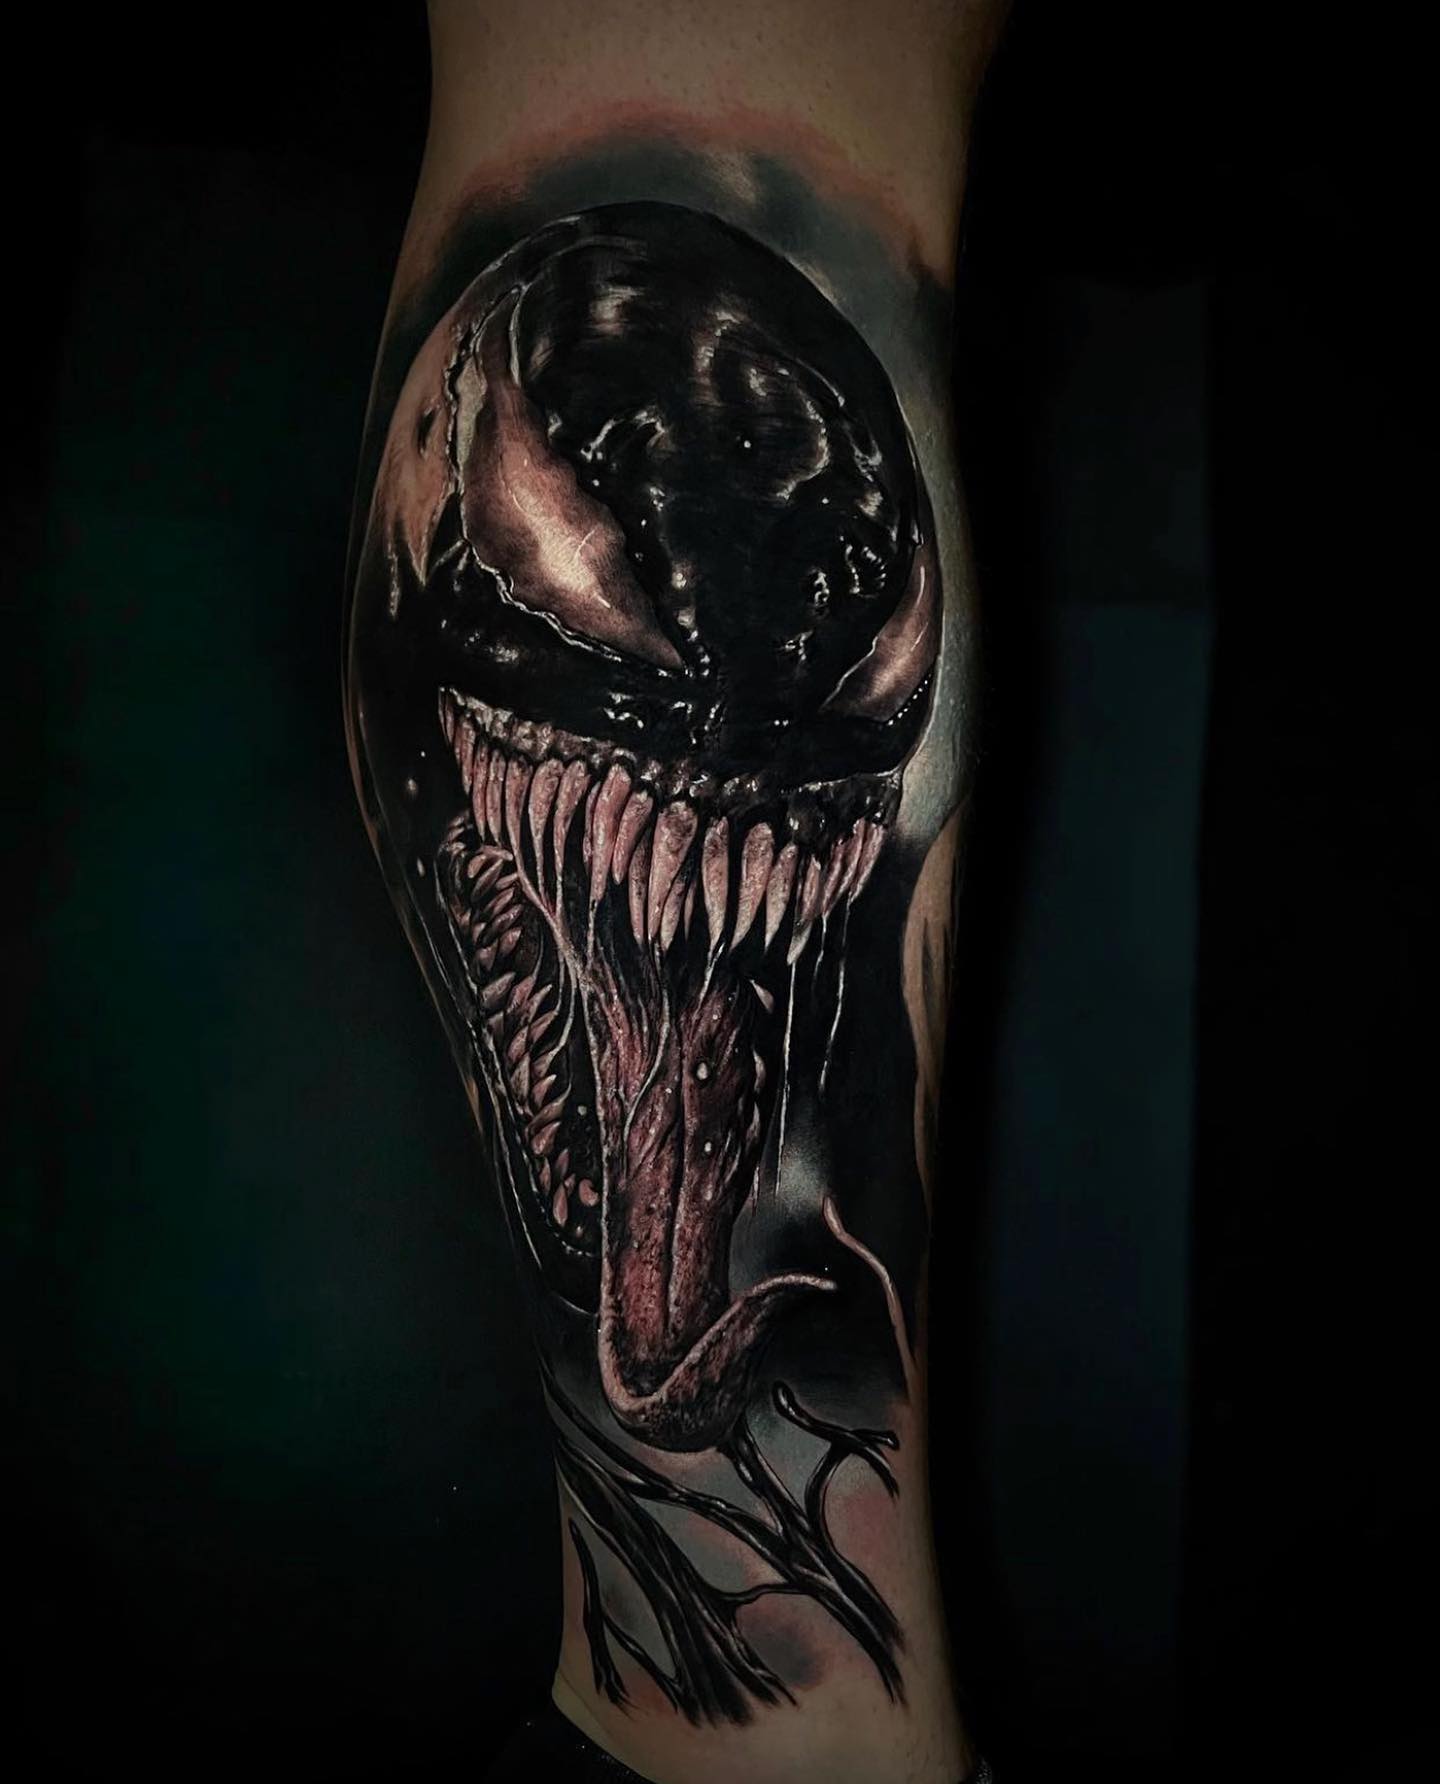 Our amazing resident youngcaviartattoo showing off his skills with this awesome Venom piece ✨
•
Omar’s books are still open for bookings in March. If you’re interested, either contact Omar directly or inquire with the shop through the link in our bio 😘
•
          totaltattoo